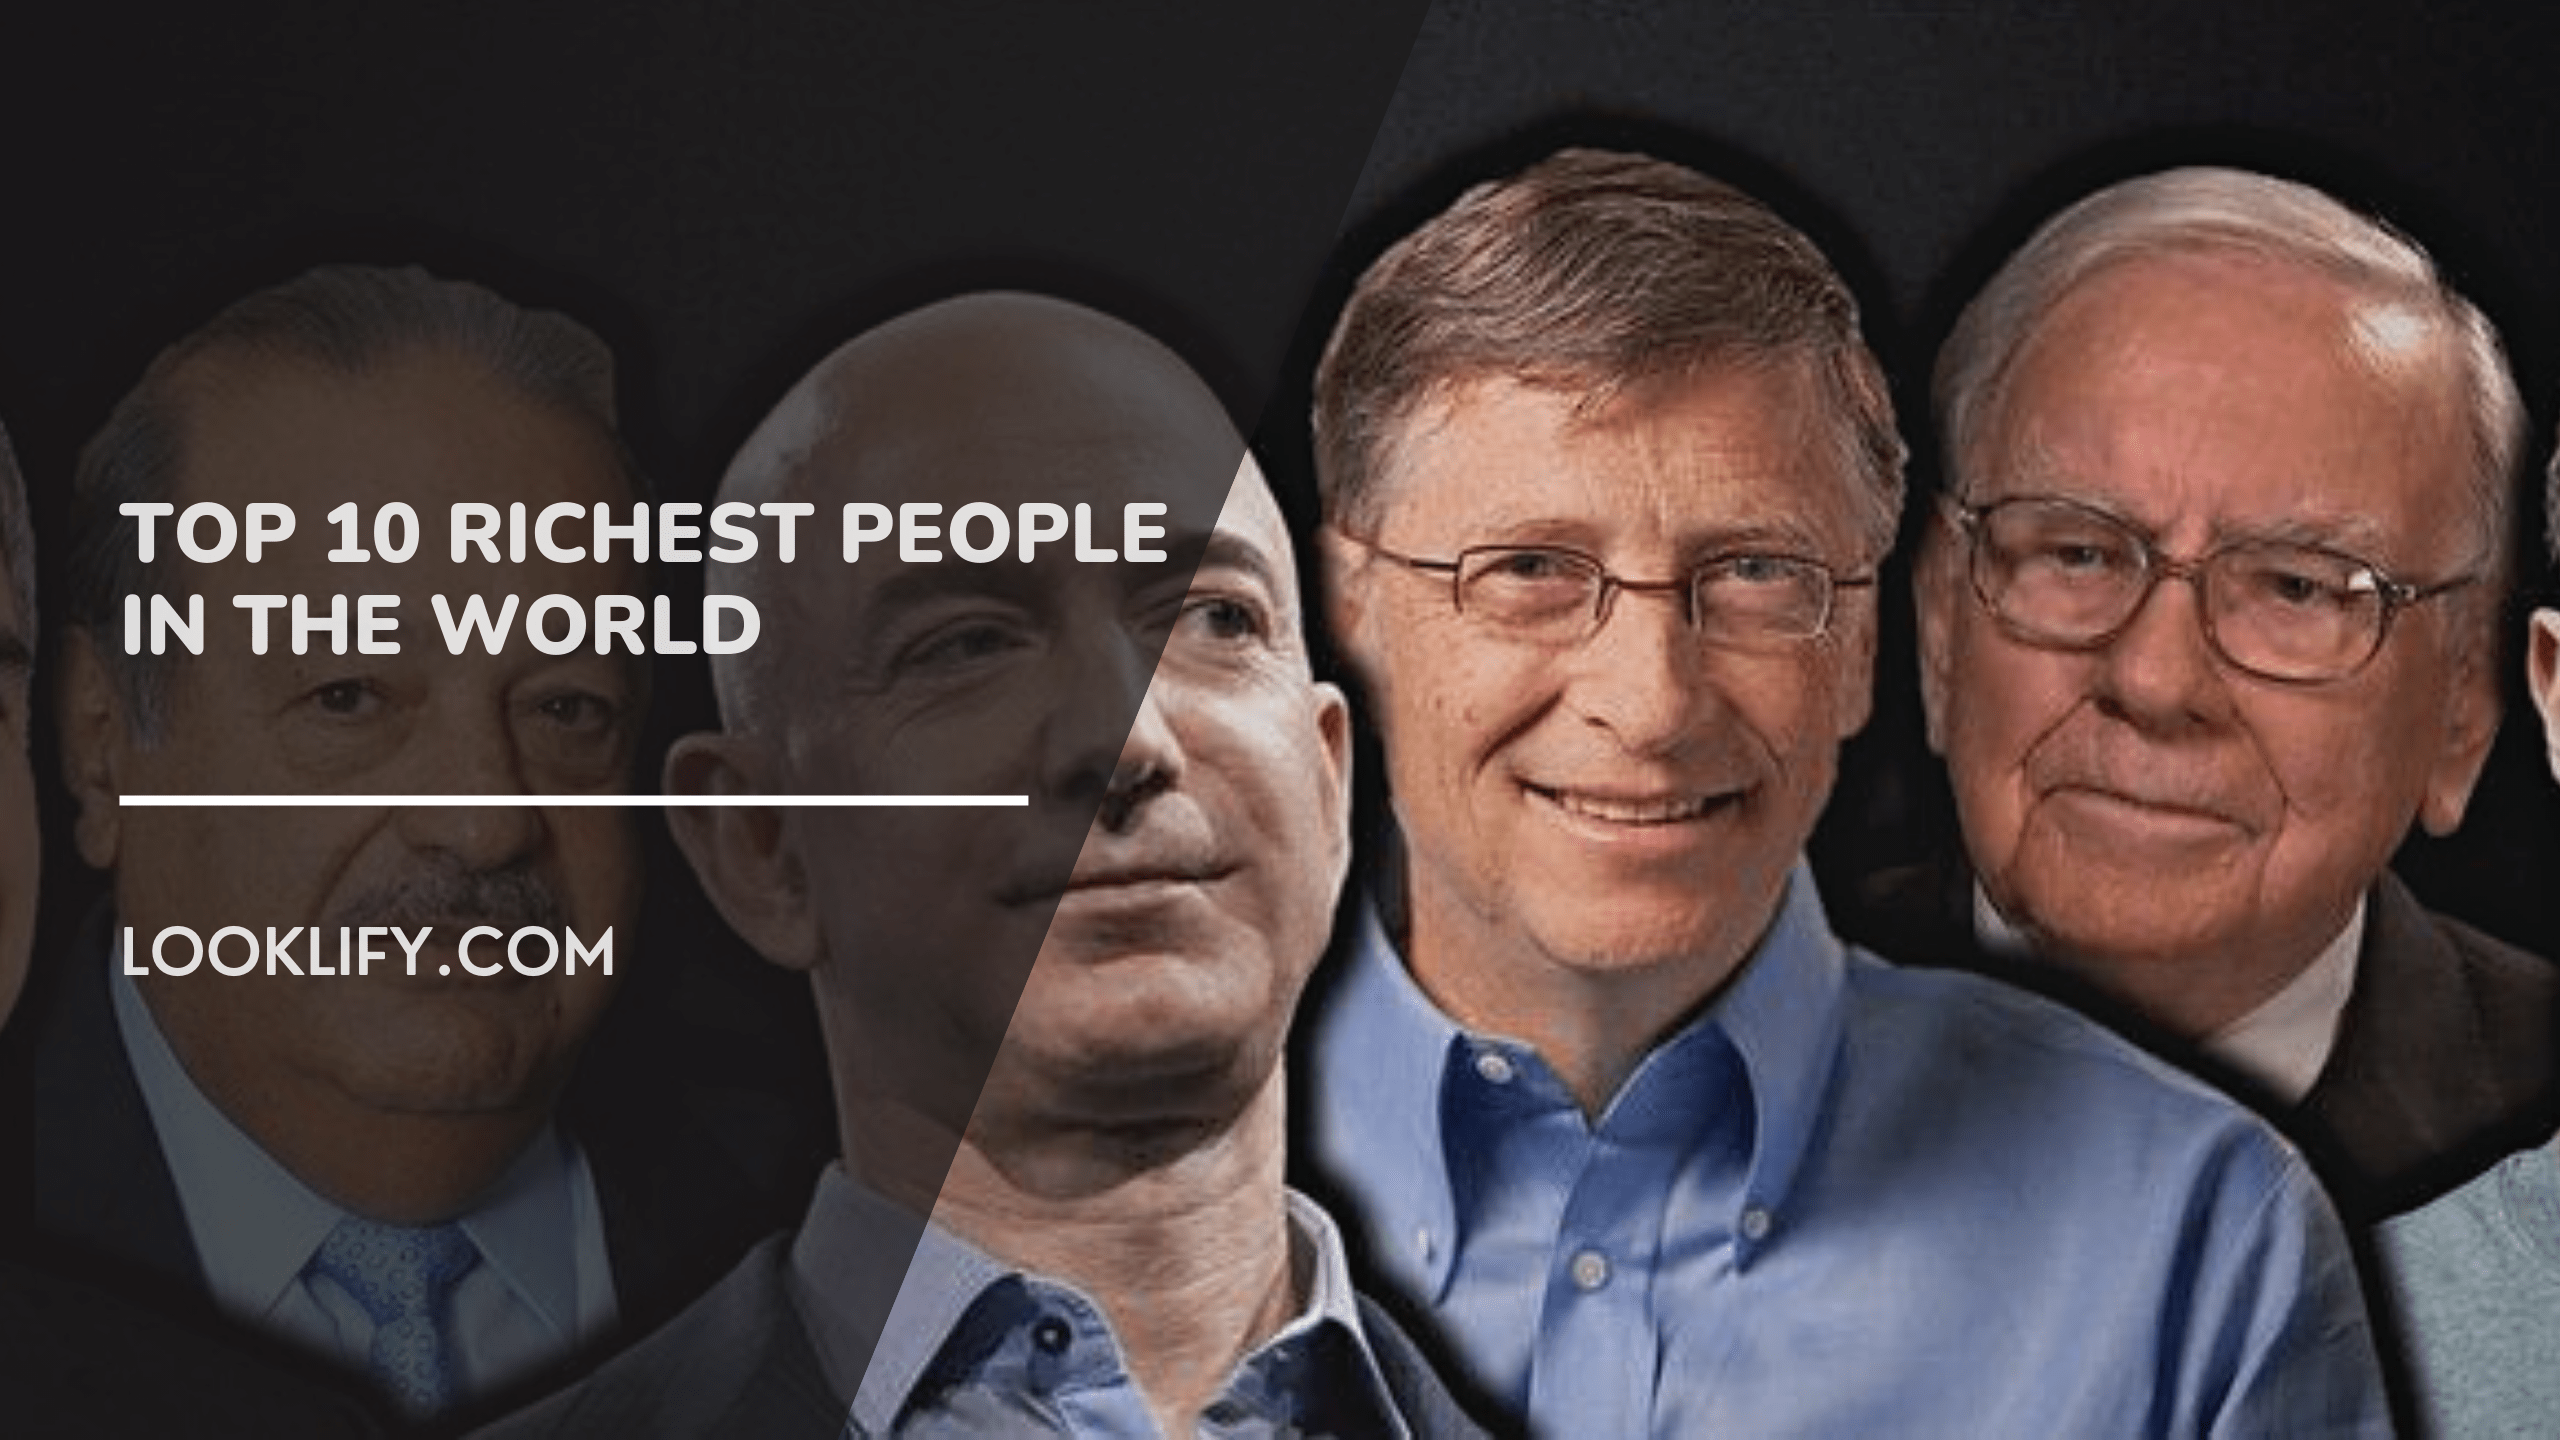 Top 10 Richest People in the World - Looklify